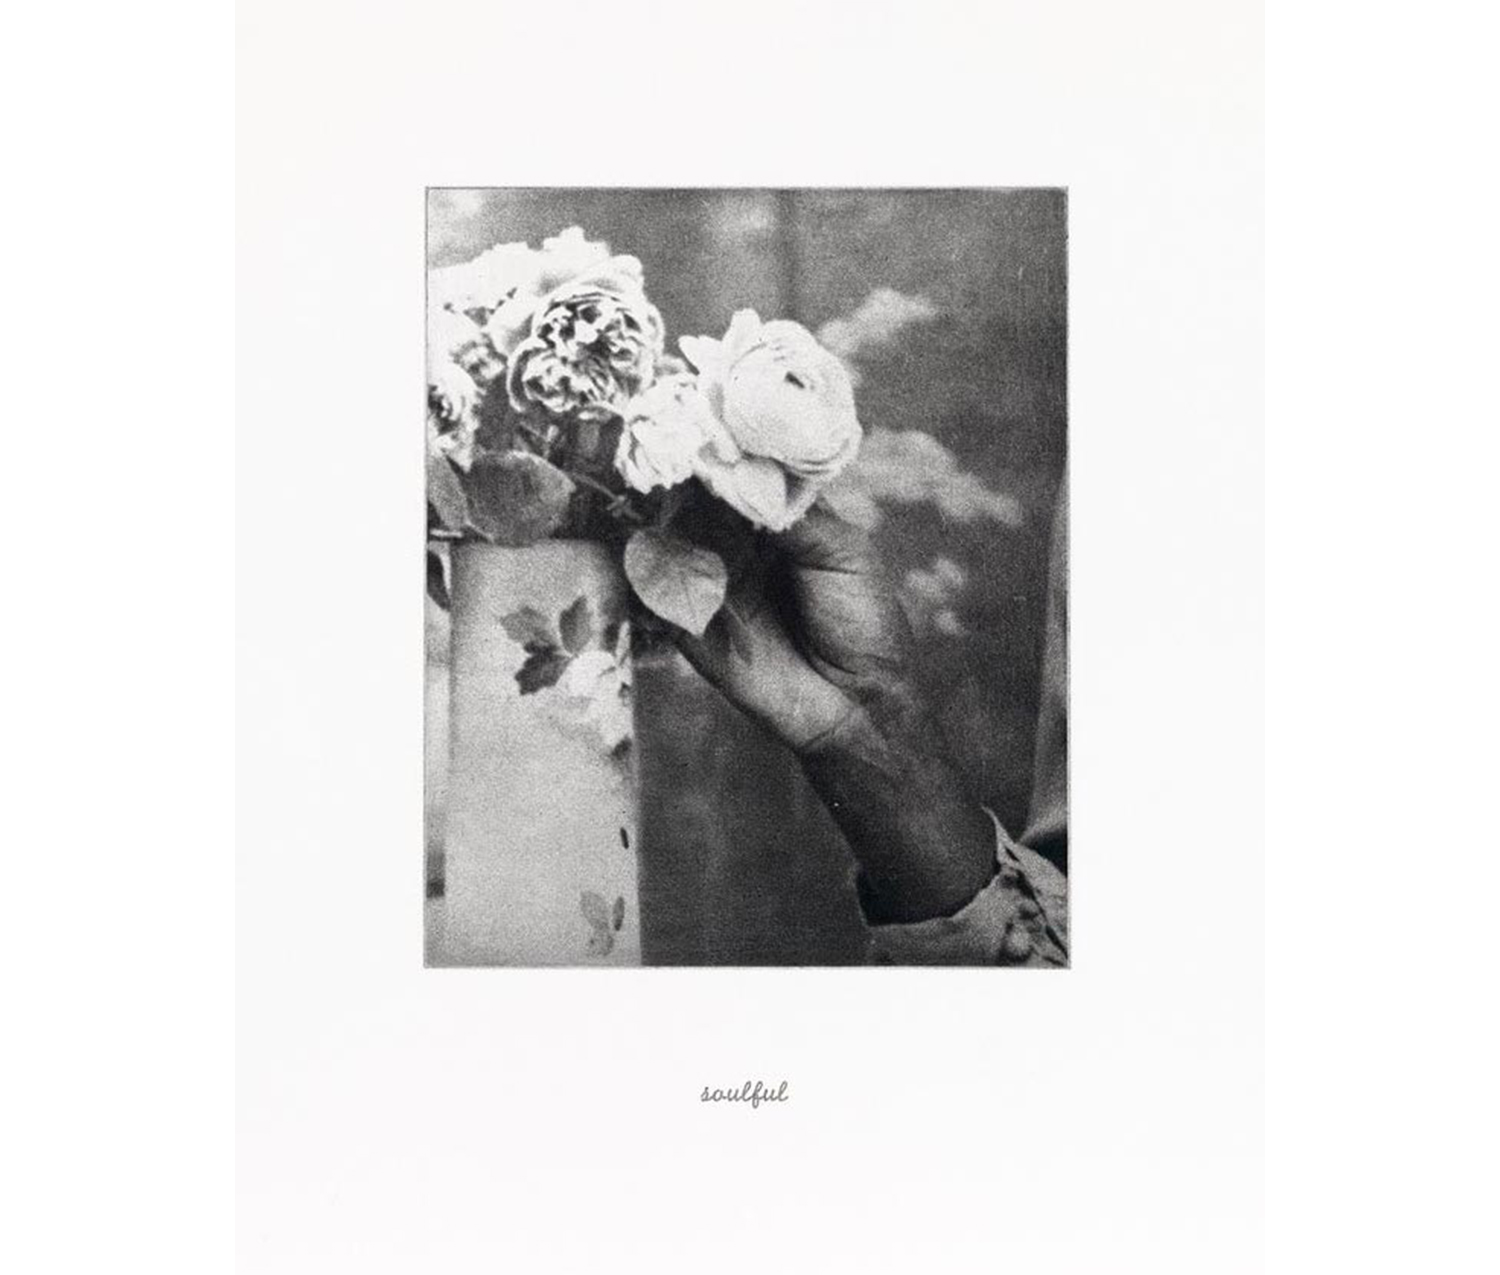 African American hand holding white flower in a vase with flower design on it; on the bottom of the image, the word "soulful" appears written in cursive